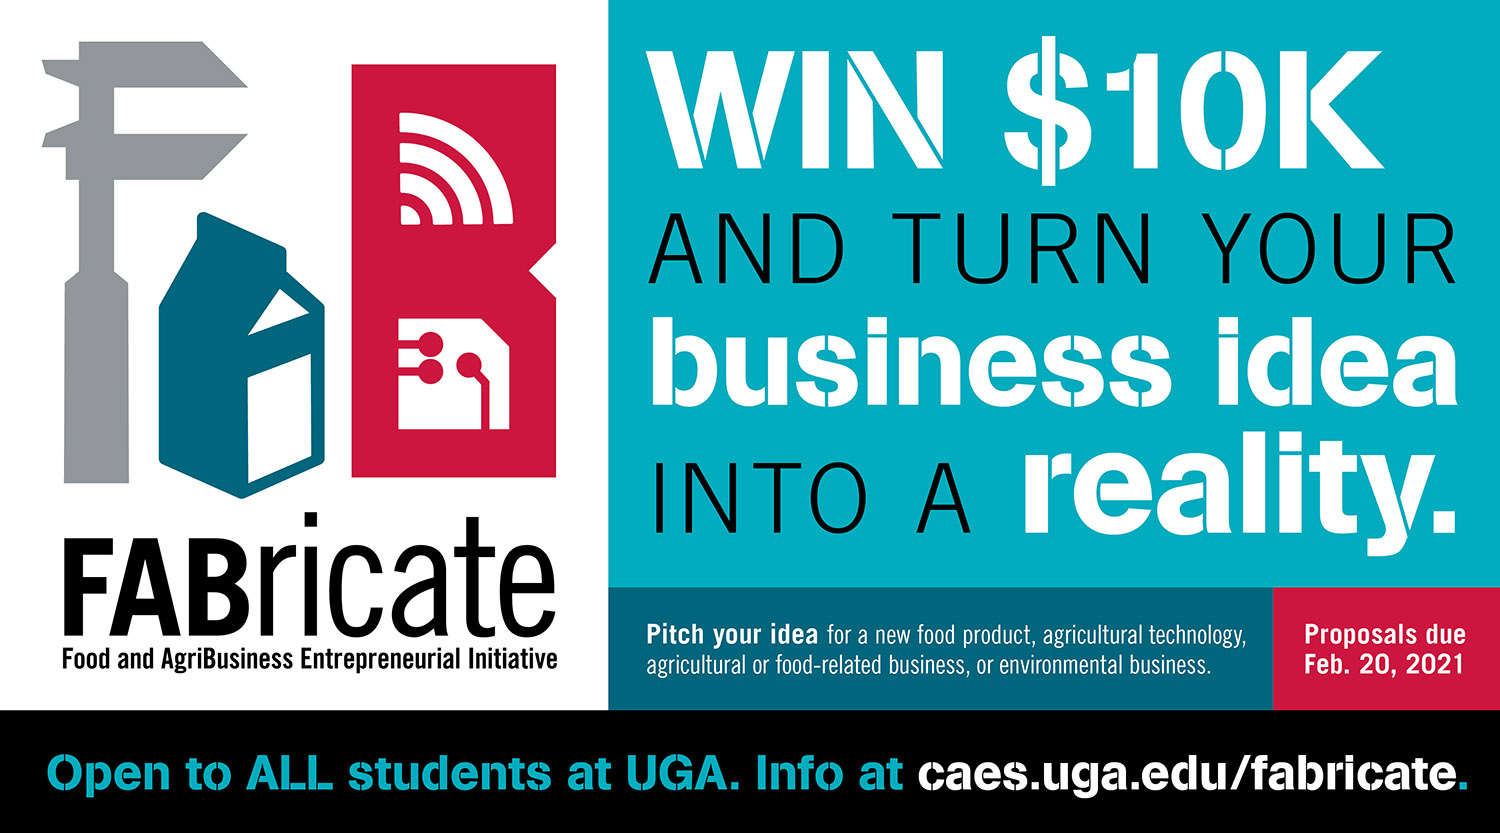 FABricate is an entrepreneurial pitch contest hosted by the UGA College of Agricultural and Environmental Sciences. Proposals are due Feb. 20 for the 2021 contest.